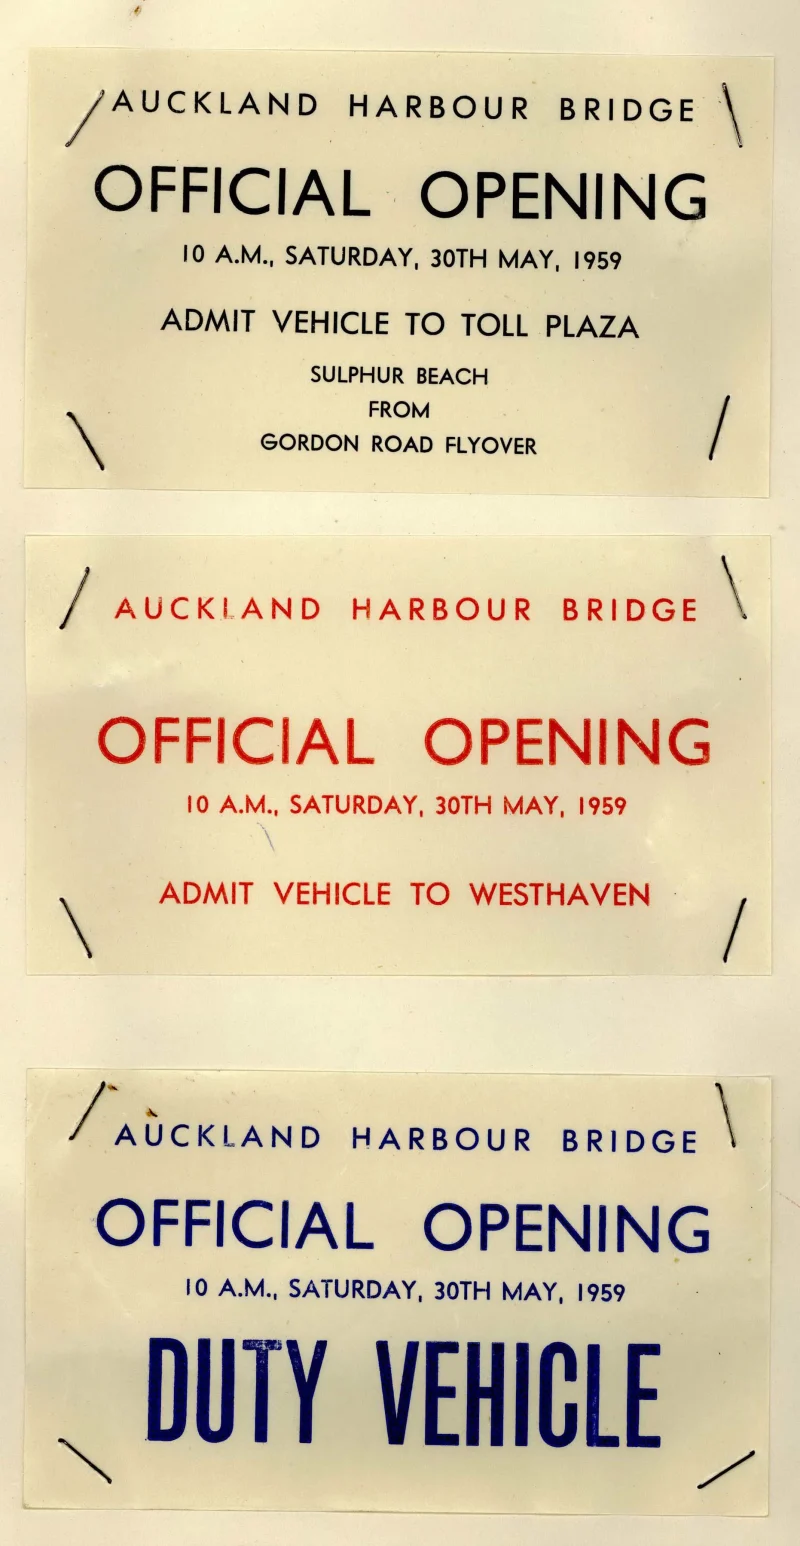 A scan of the card allowing vehicle access for the Bridge opening